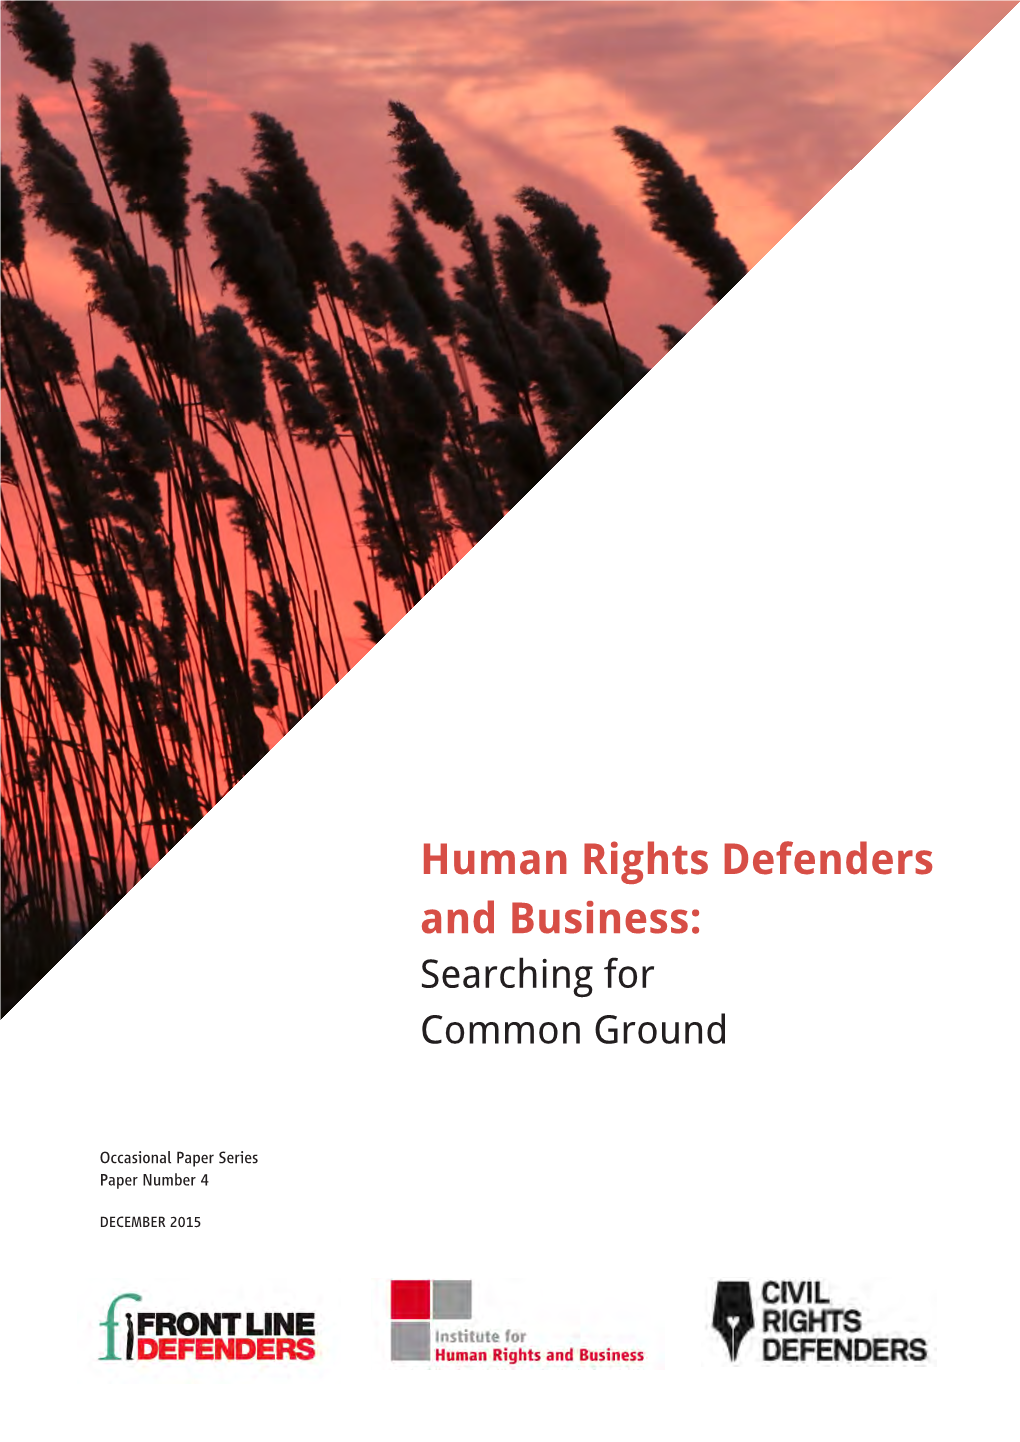 Human Rights Defenders and Business: Searching for Common Ground